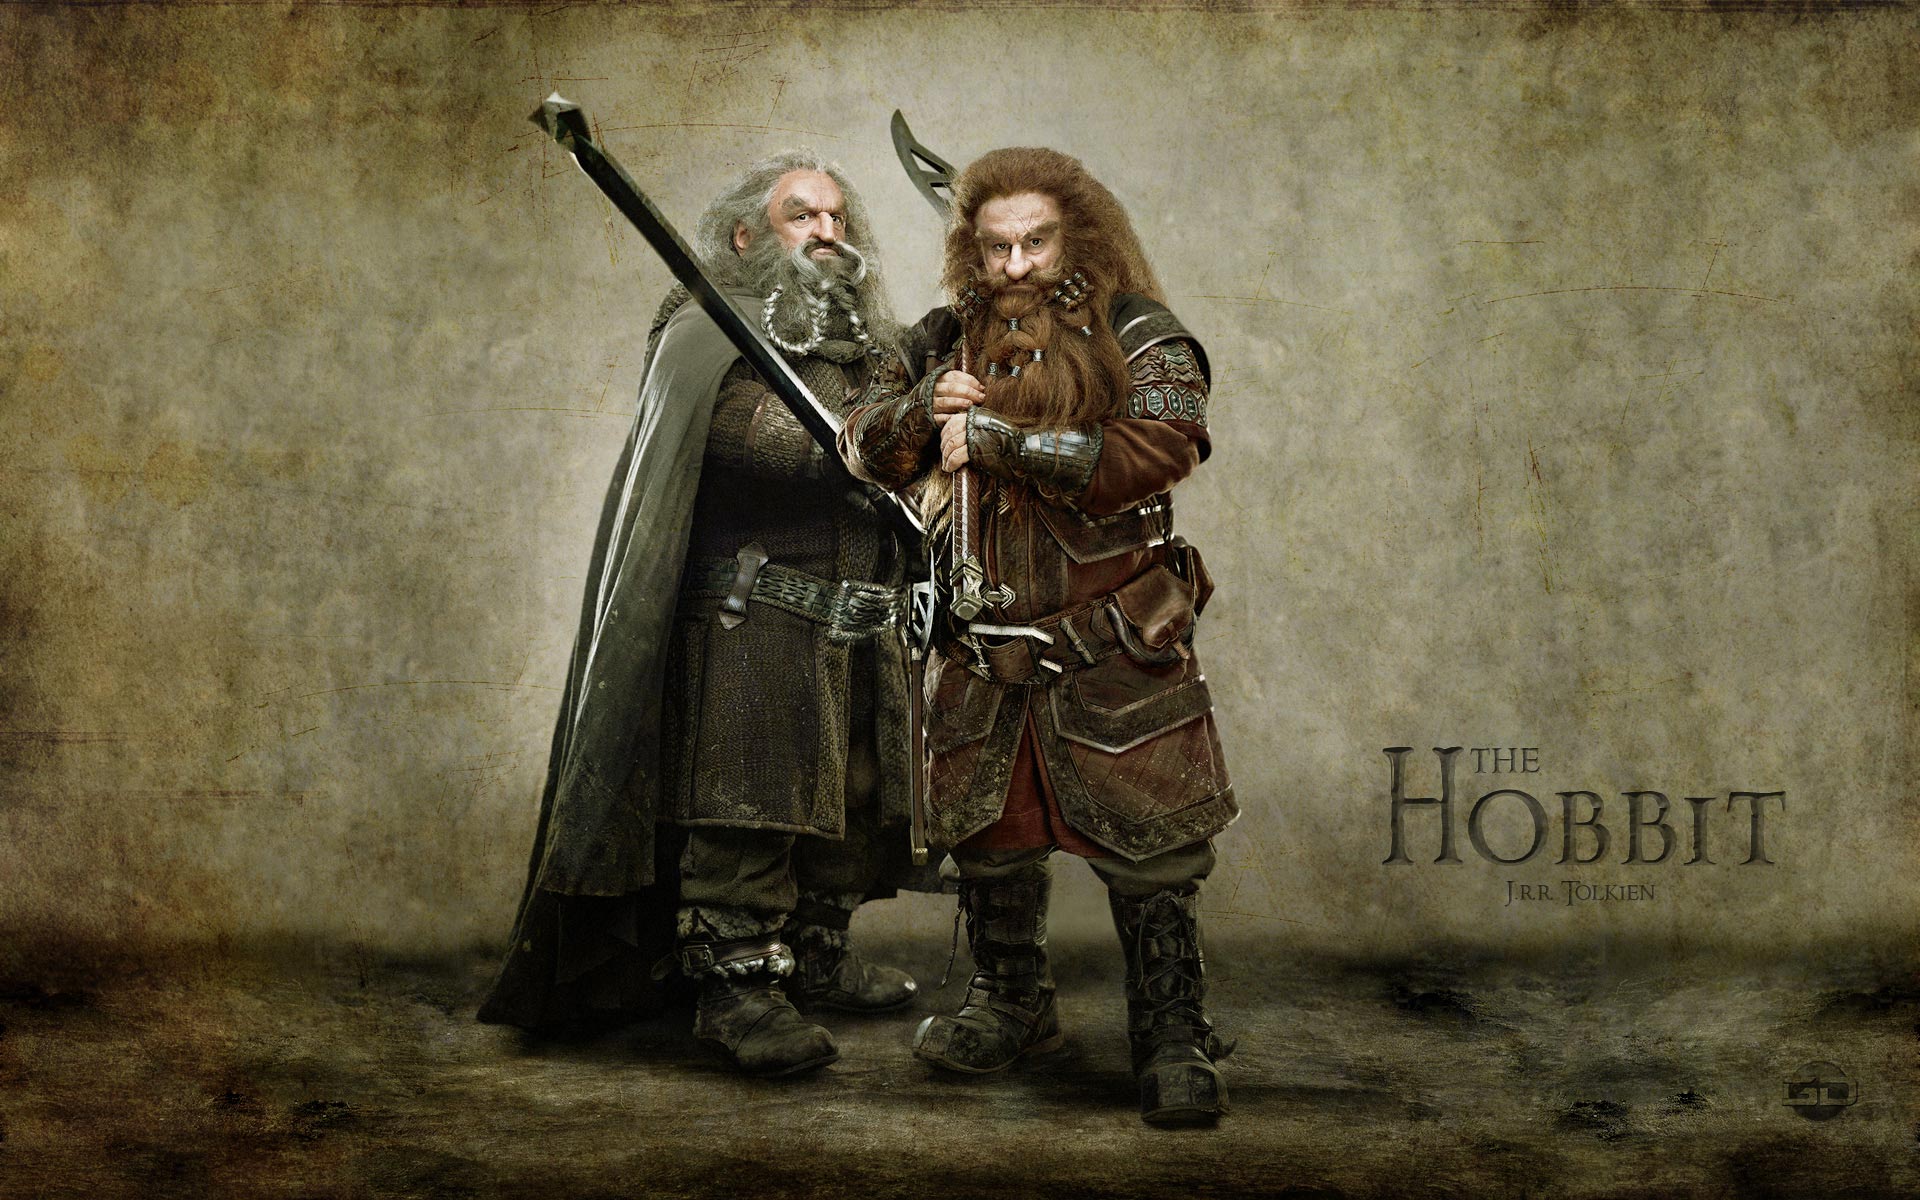 The Hobbit Movie Wallpaper Awesome